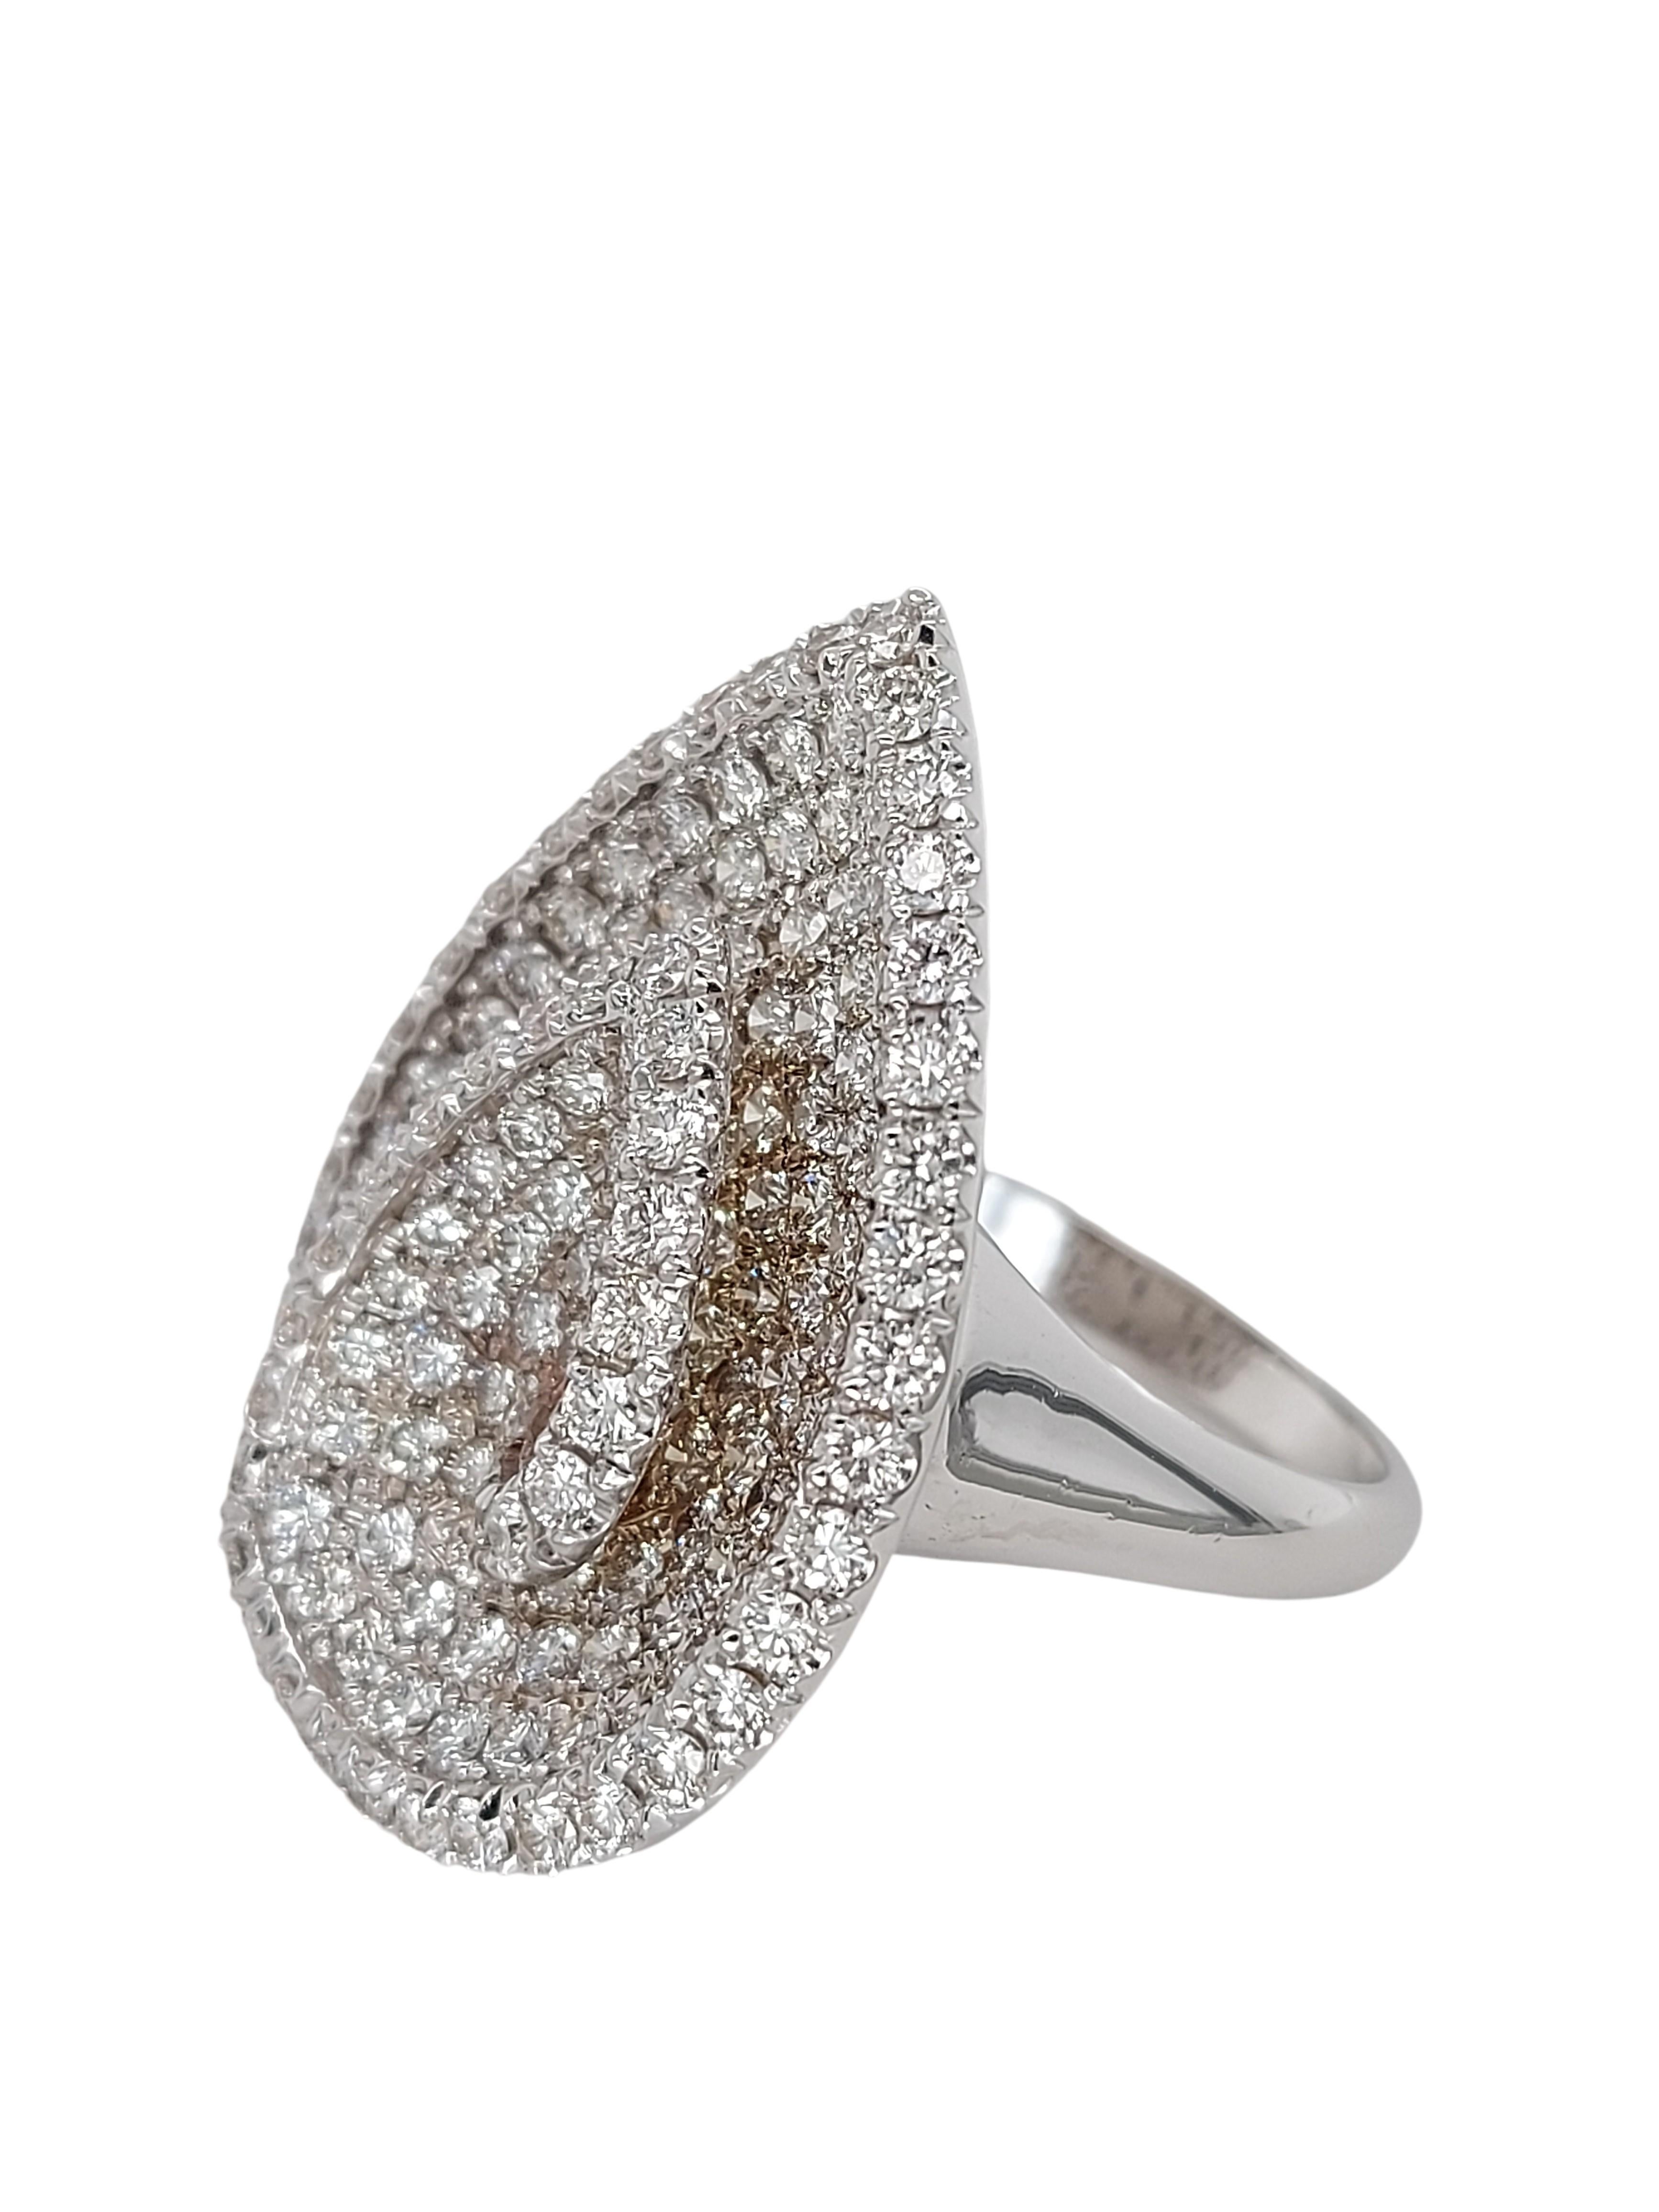 Magnificent 18kt Gold Pavé Diamond Pear Shape Ring 

Diamonds: 213 brilliant cut diamonds, 5.32 Ct

Material: 18kt white gold

Ring size: 55 EU / 7.25 US 5 (Size can be adjusted for free)

Total weight: 13.2 gram / 0.470 oz / 8.5 dwt 